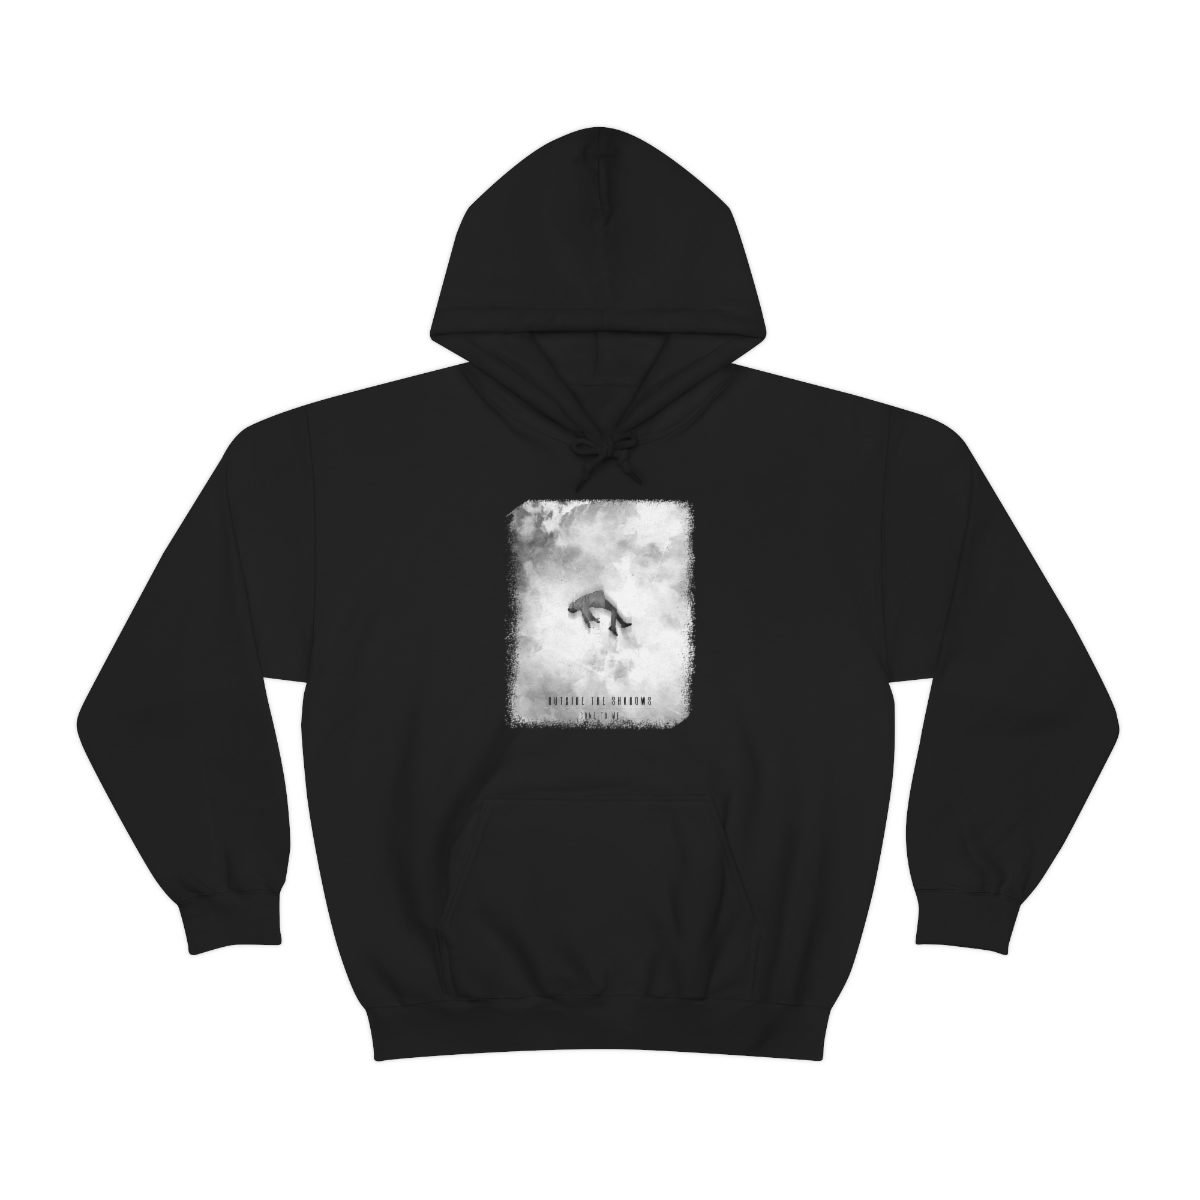 Outside the Shadows – Come To Me BW Pullover Hooded Sweatshirt